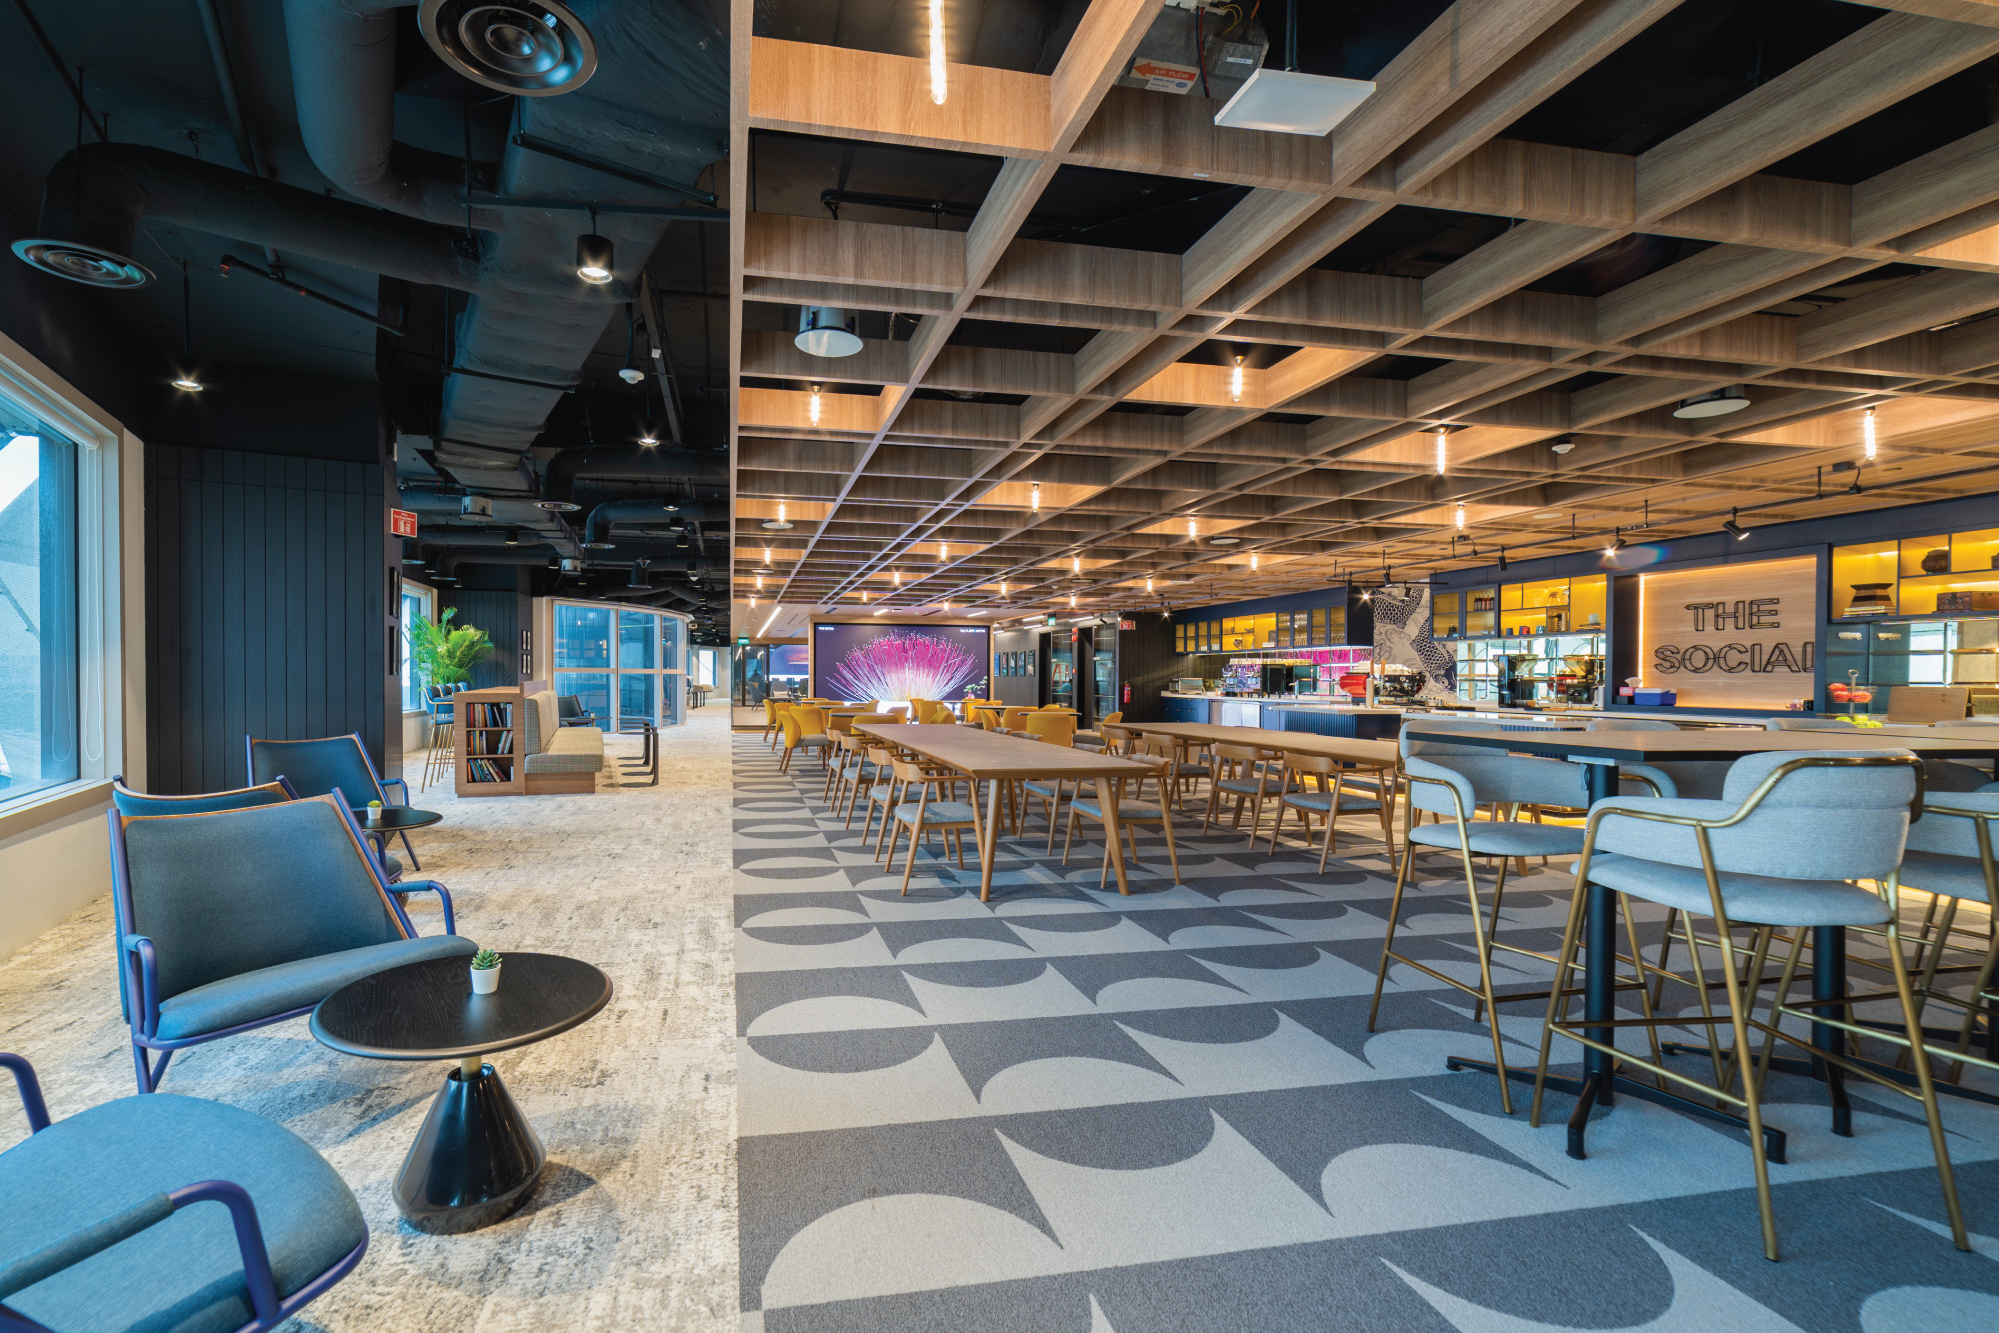 Hilton’s office space in Singapore - Bringing hospitality into design